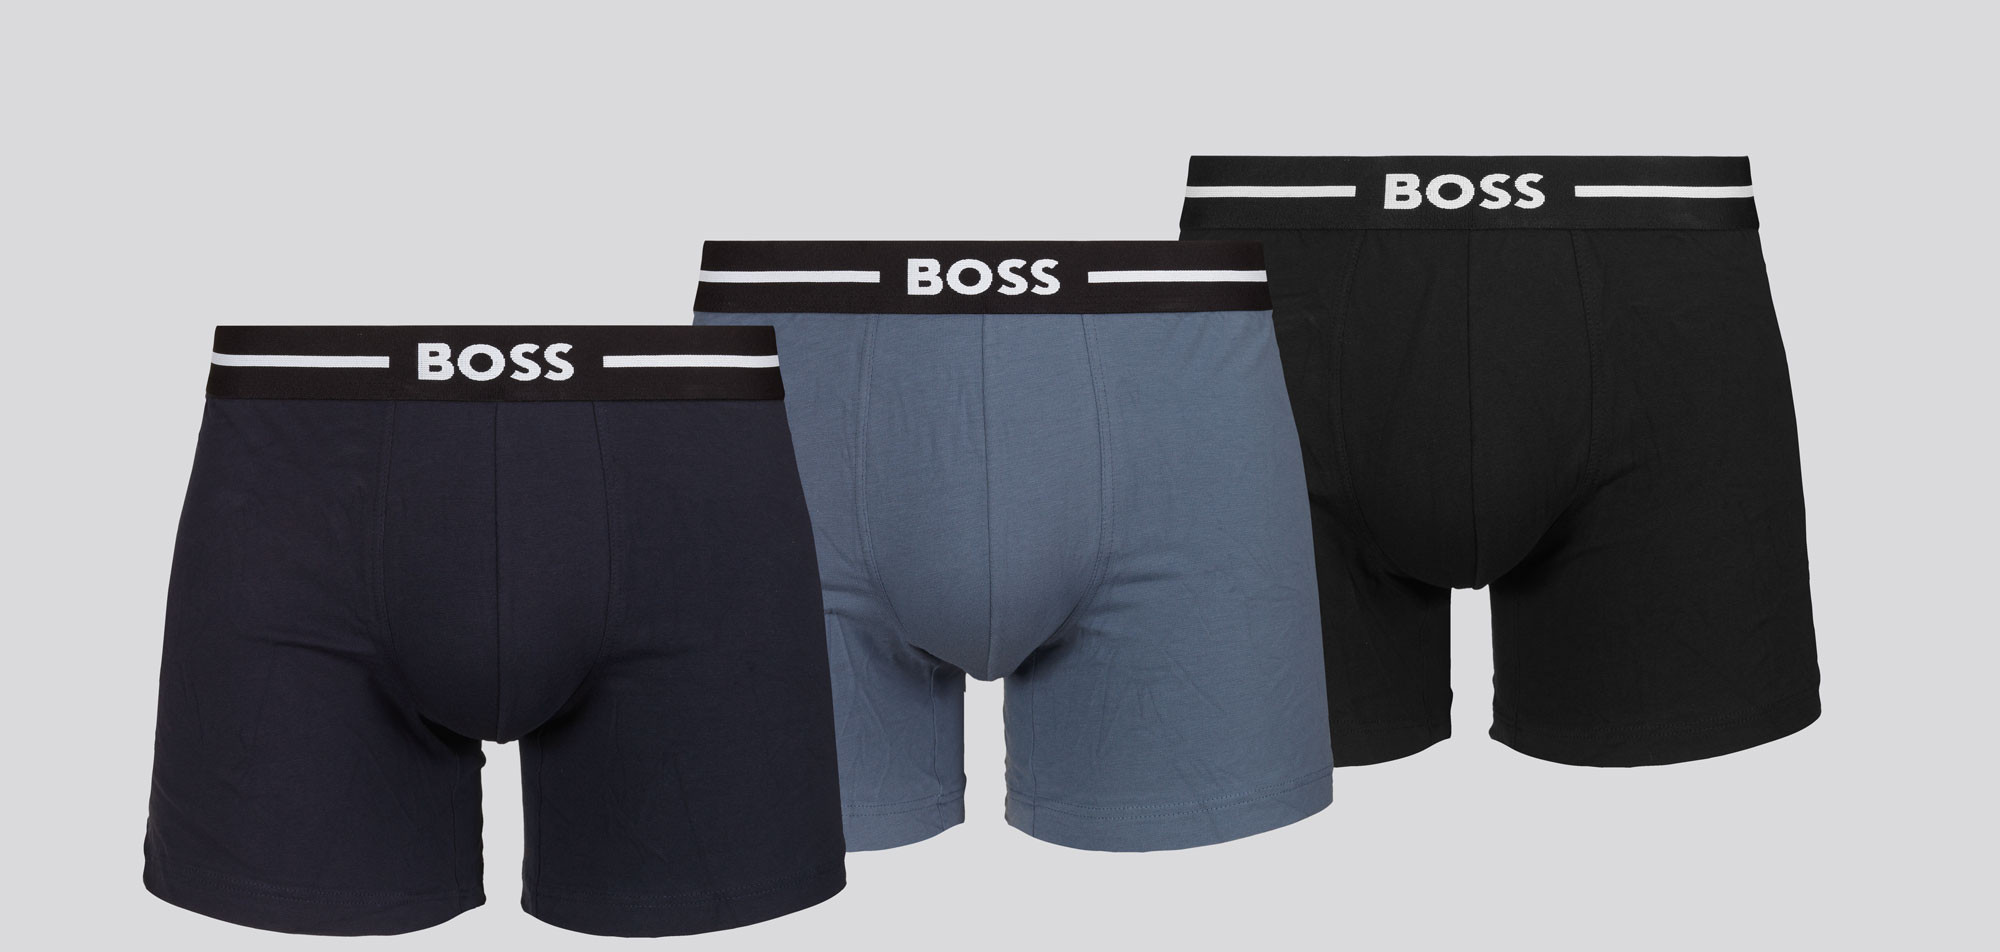 Boss Boxer Brief 3-Pack 621 Bold